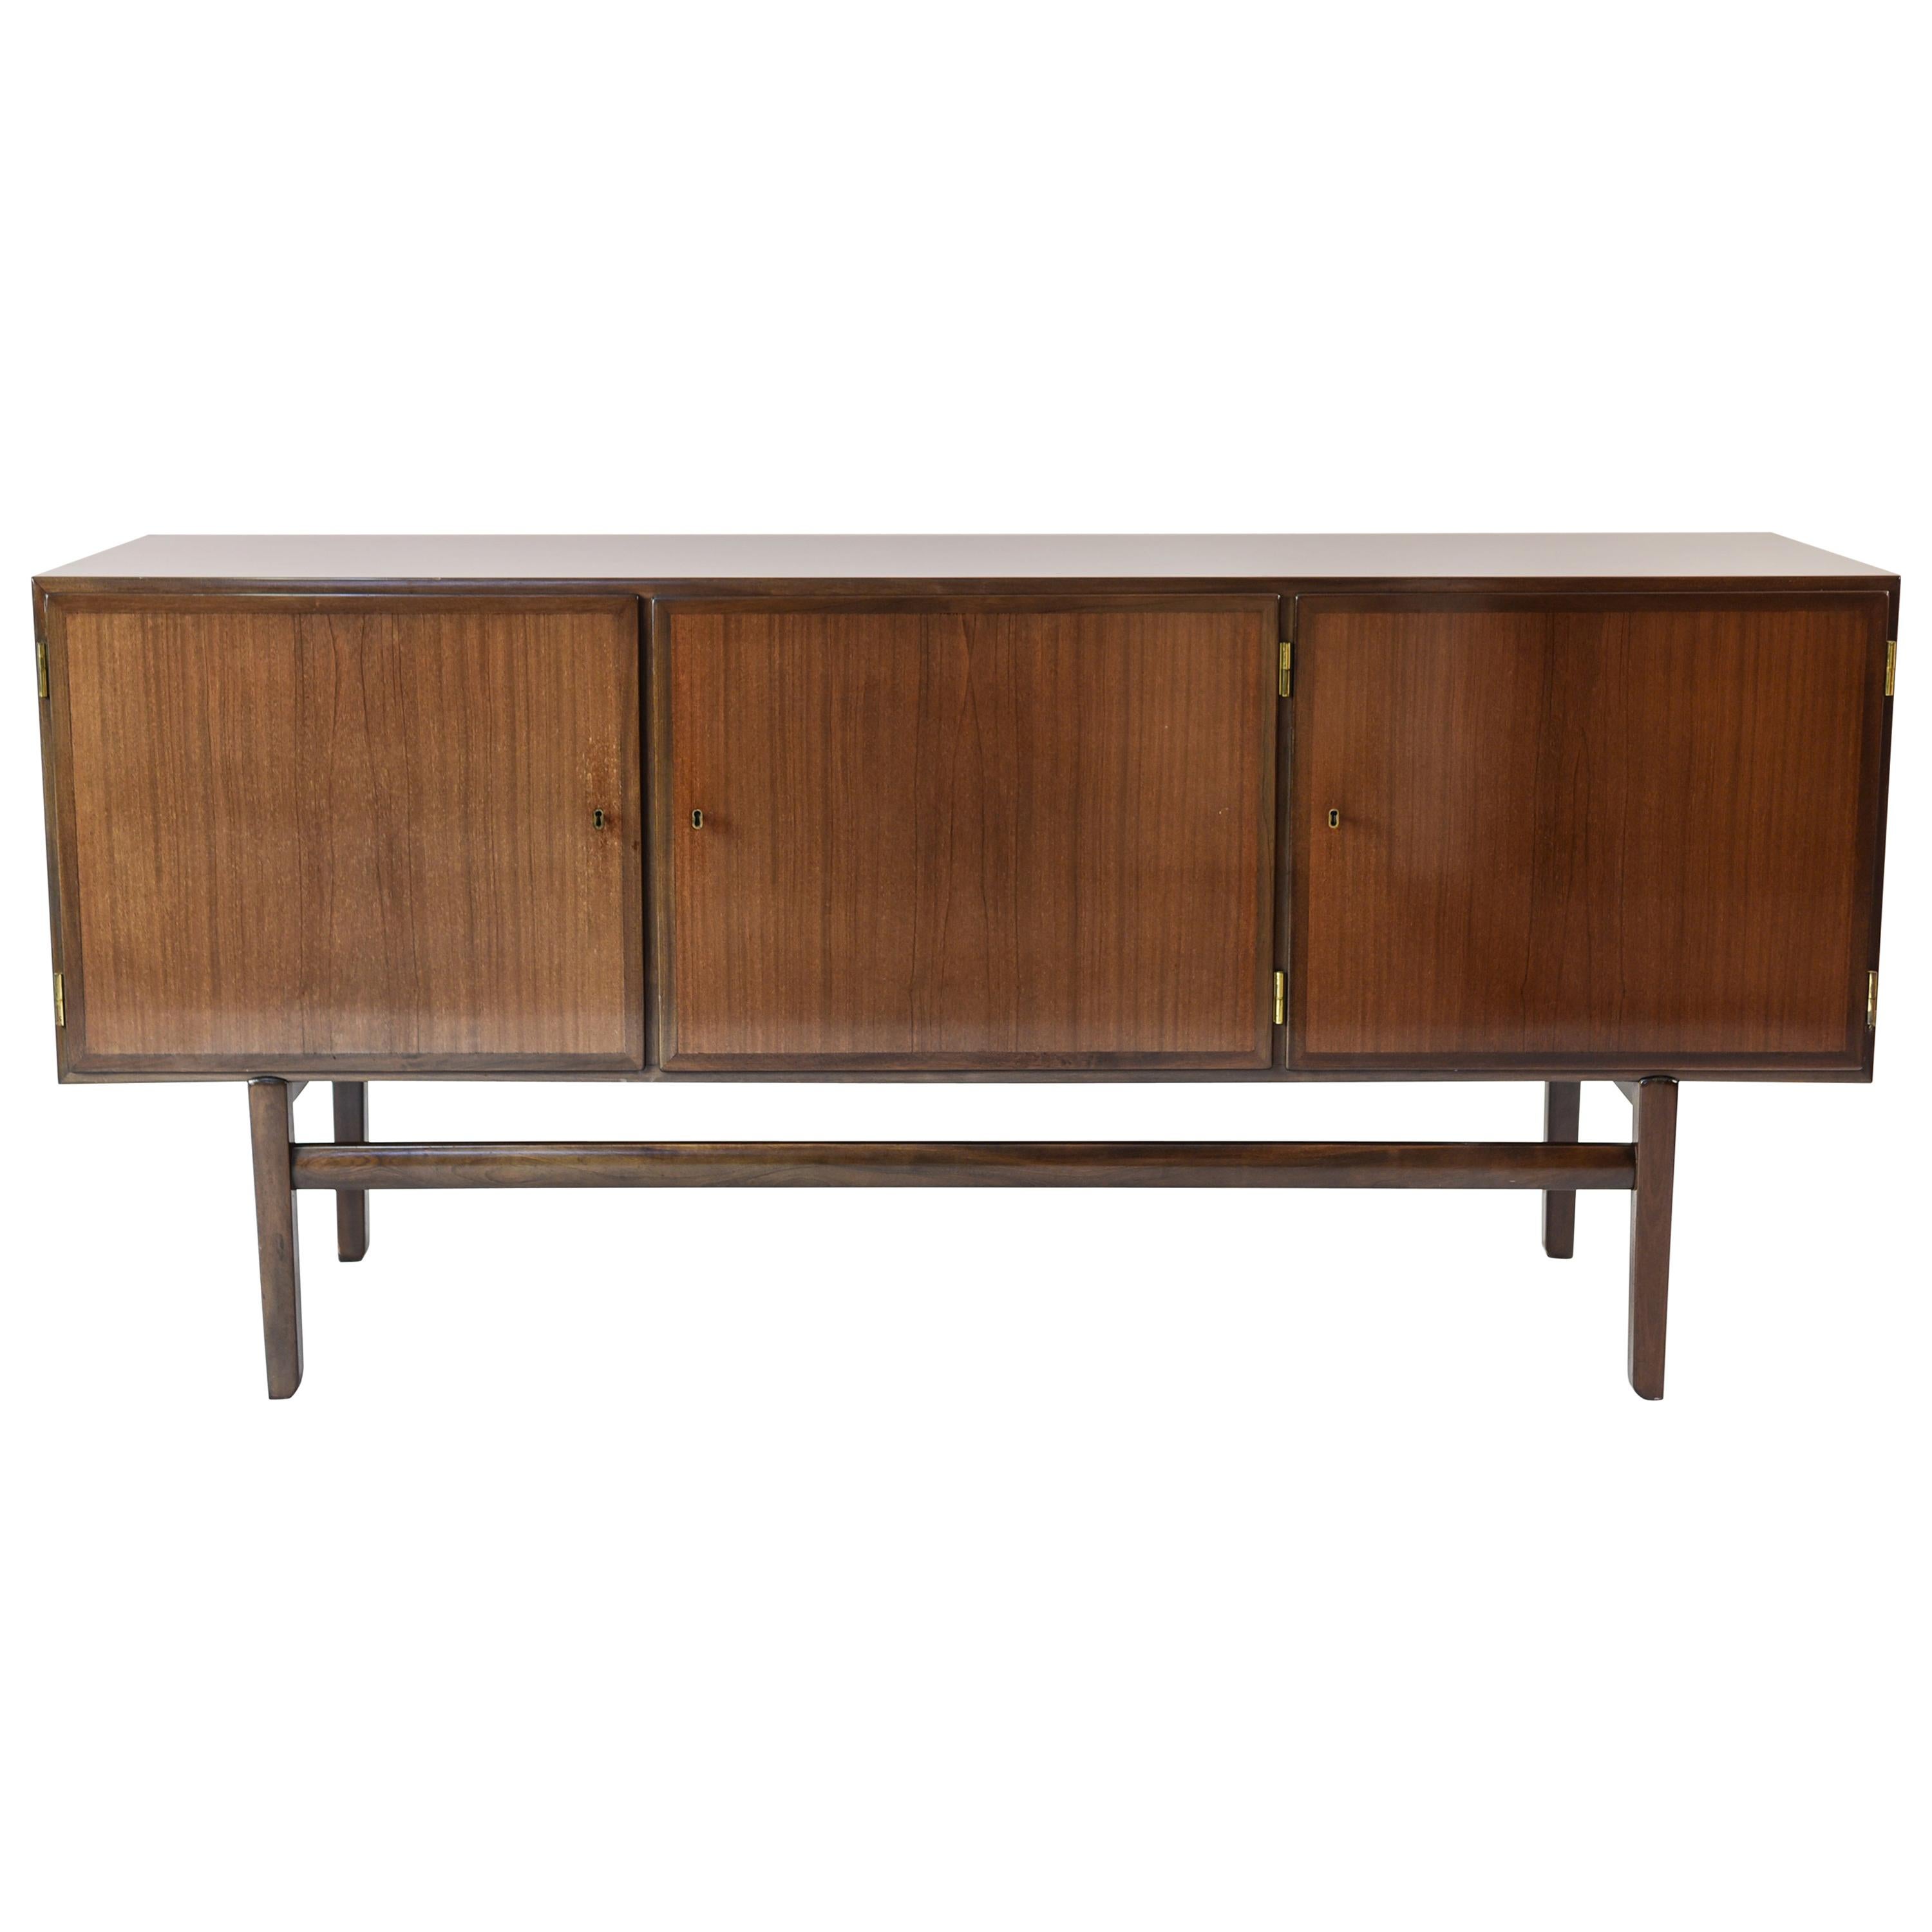 Ole Wanscher for Poul Jeppesen Rungstedlund Mahogany Sideboard